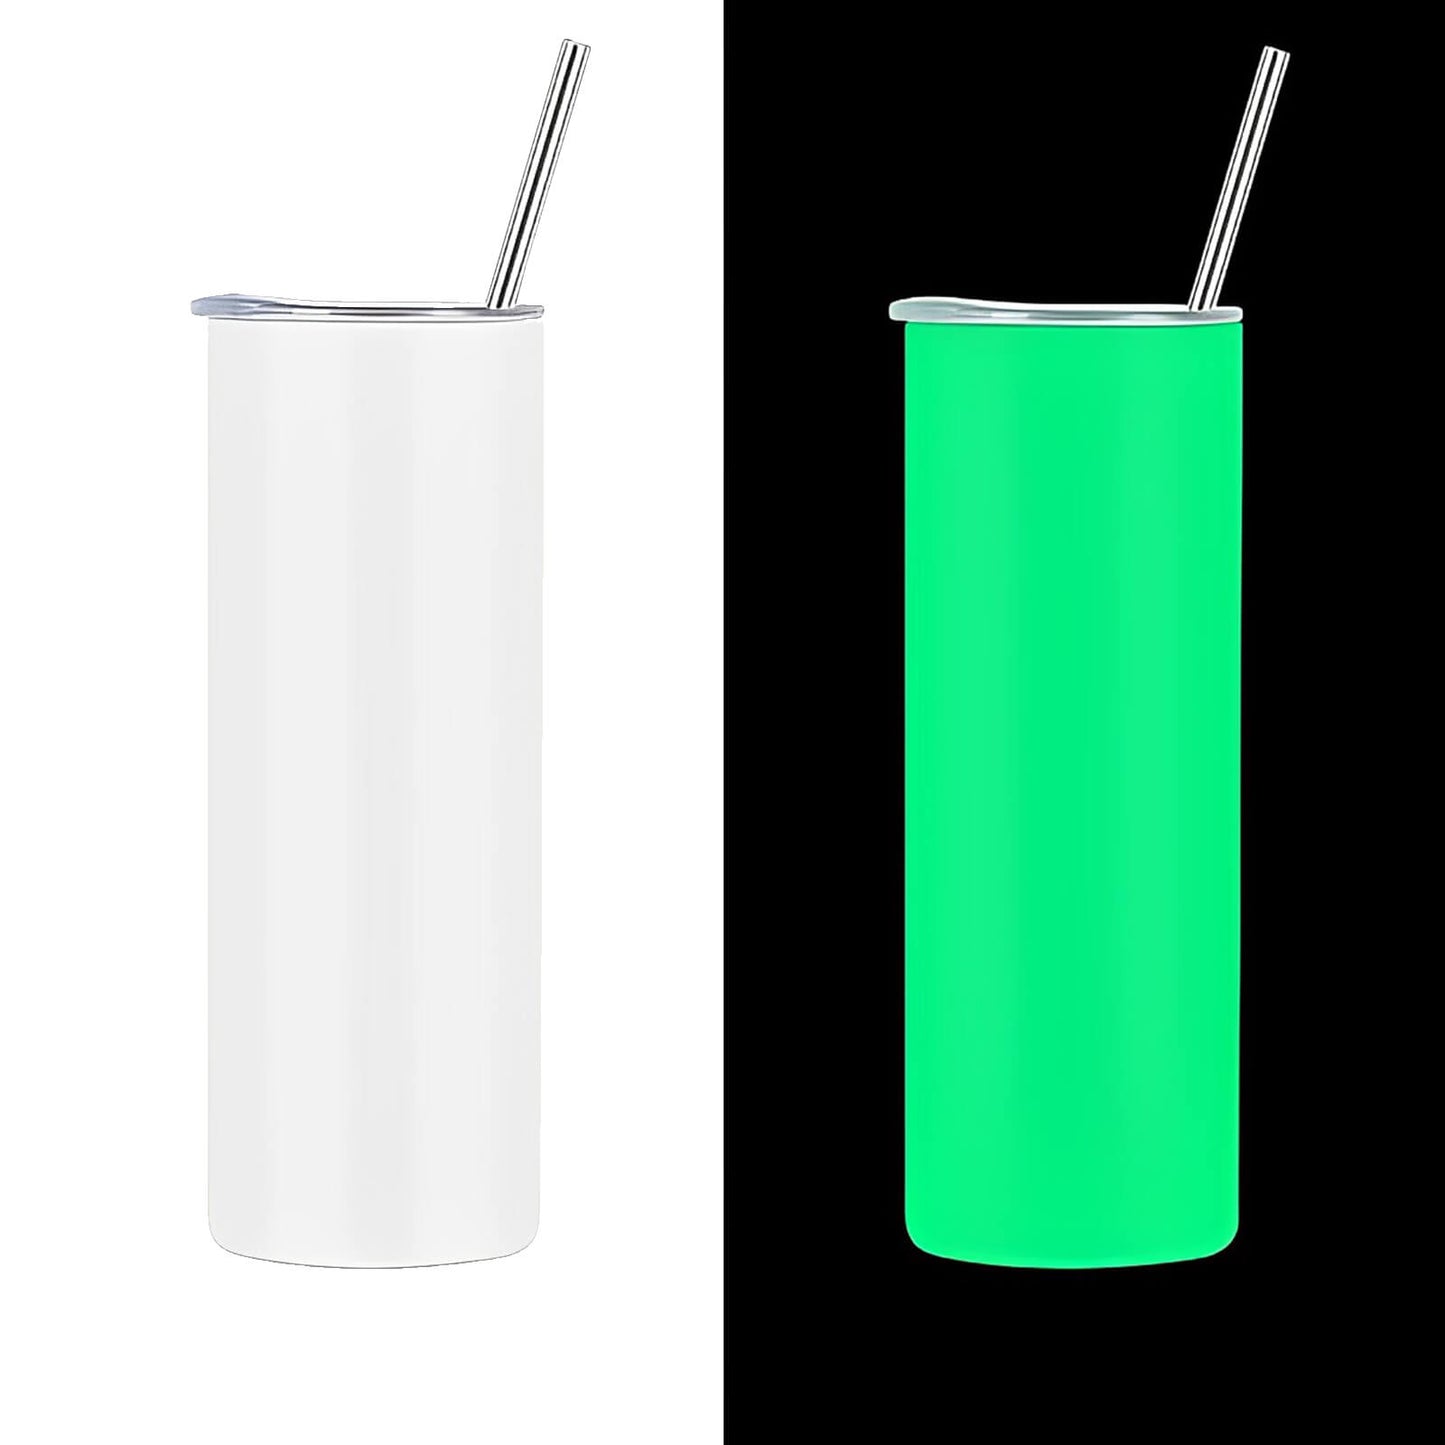 Glow In The Dark Sublimation Tumblers, 20oz skinny tumbler, tumbler blanks, sublimation tumbler wrap, blank sublimation tumblers, 20oz sublimation tumblers, 20oz sublimation tumbler, tumbler bulk, sublimation tumbler blanks, sublimation blank tumblers, tumbler sublimation, 20 oz sublimation tumbler, 20 oz skinny tumbler, sublimation tumbler designs, sublimation tumblers wholesale, sublimated tumblers, sublimation blanks wholesale, sublimation tumbler, sublimation tumblers, sublimation